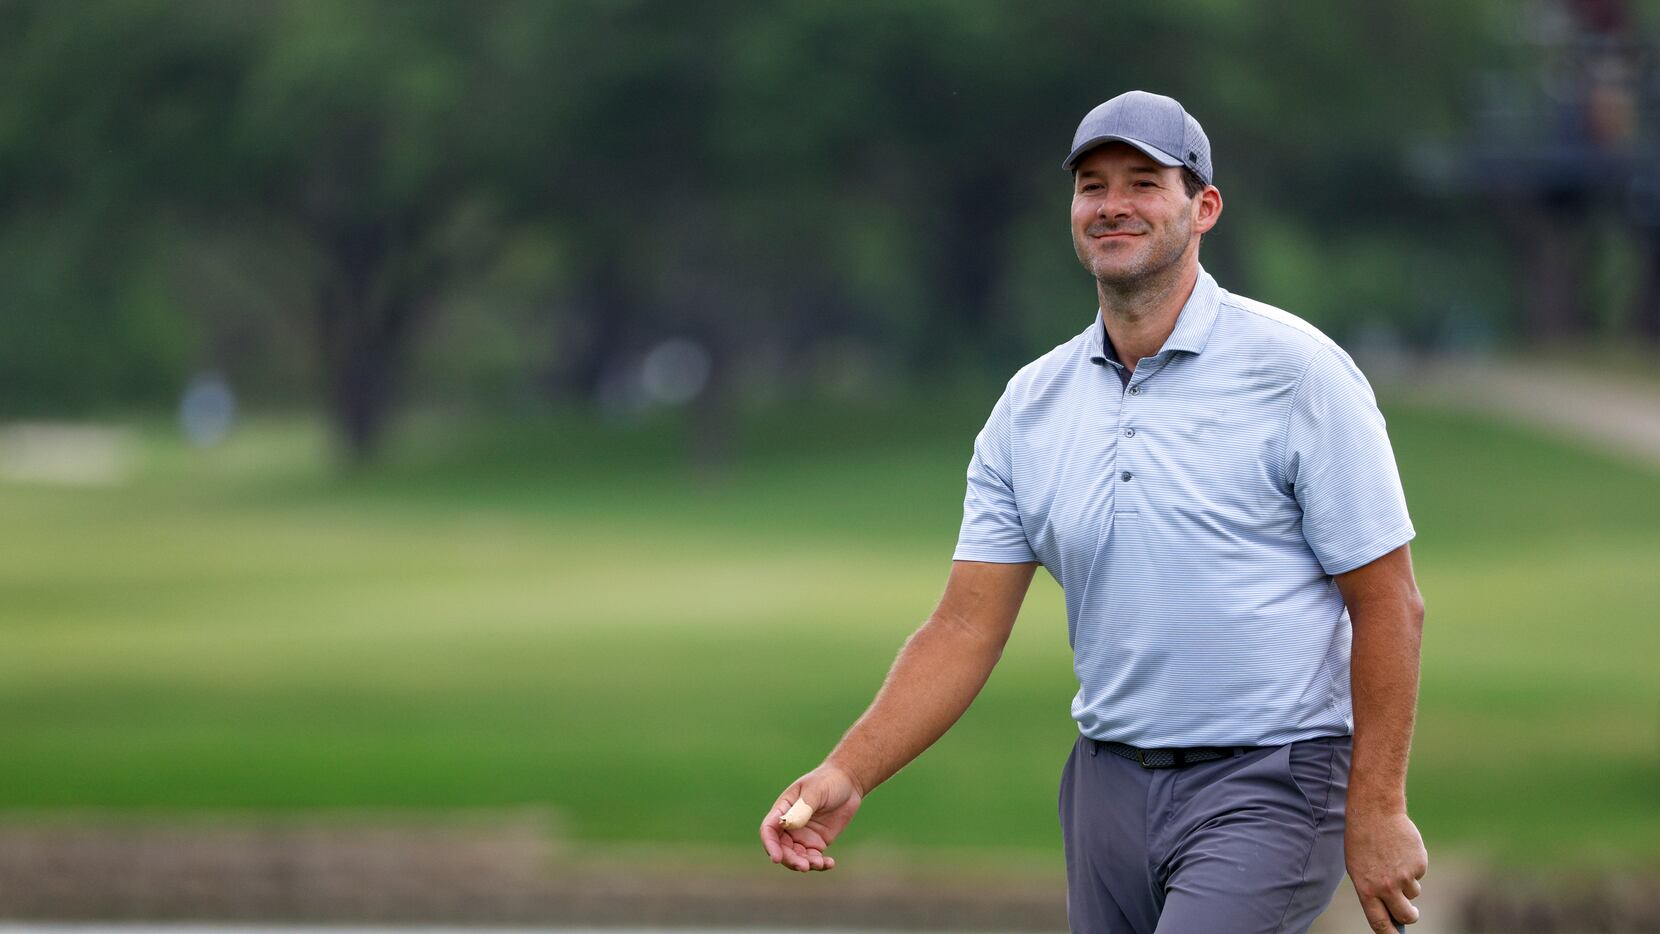 Former Dallas Cowboys quarterback Tony Romo smiles after a putt on the 18th green during the...